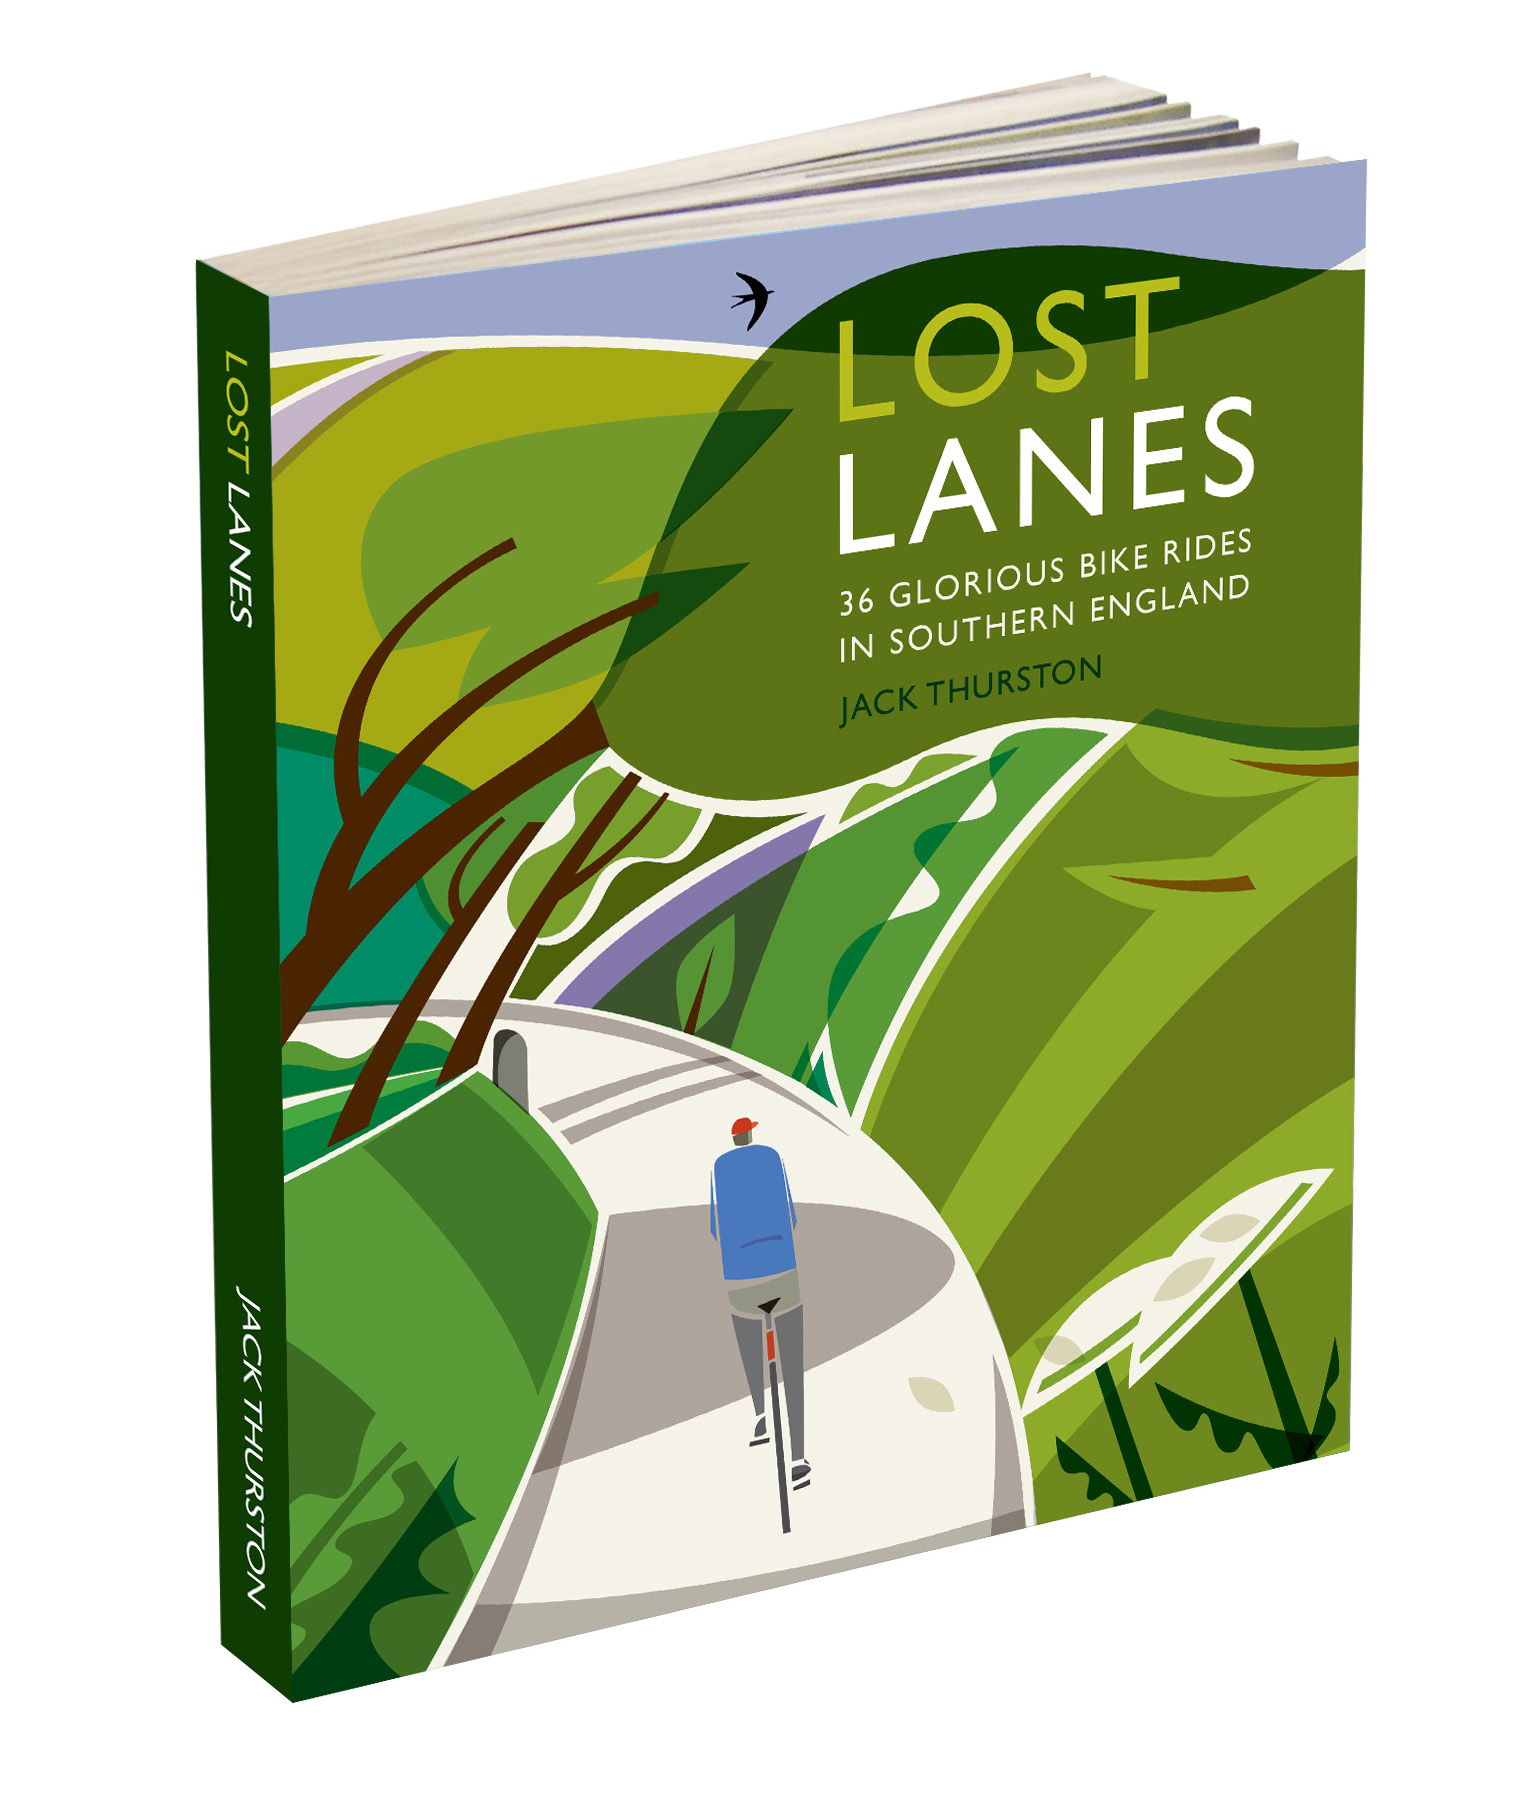 Lost Lanes: 36 Glorious Bike Rides in Southern England